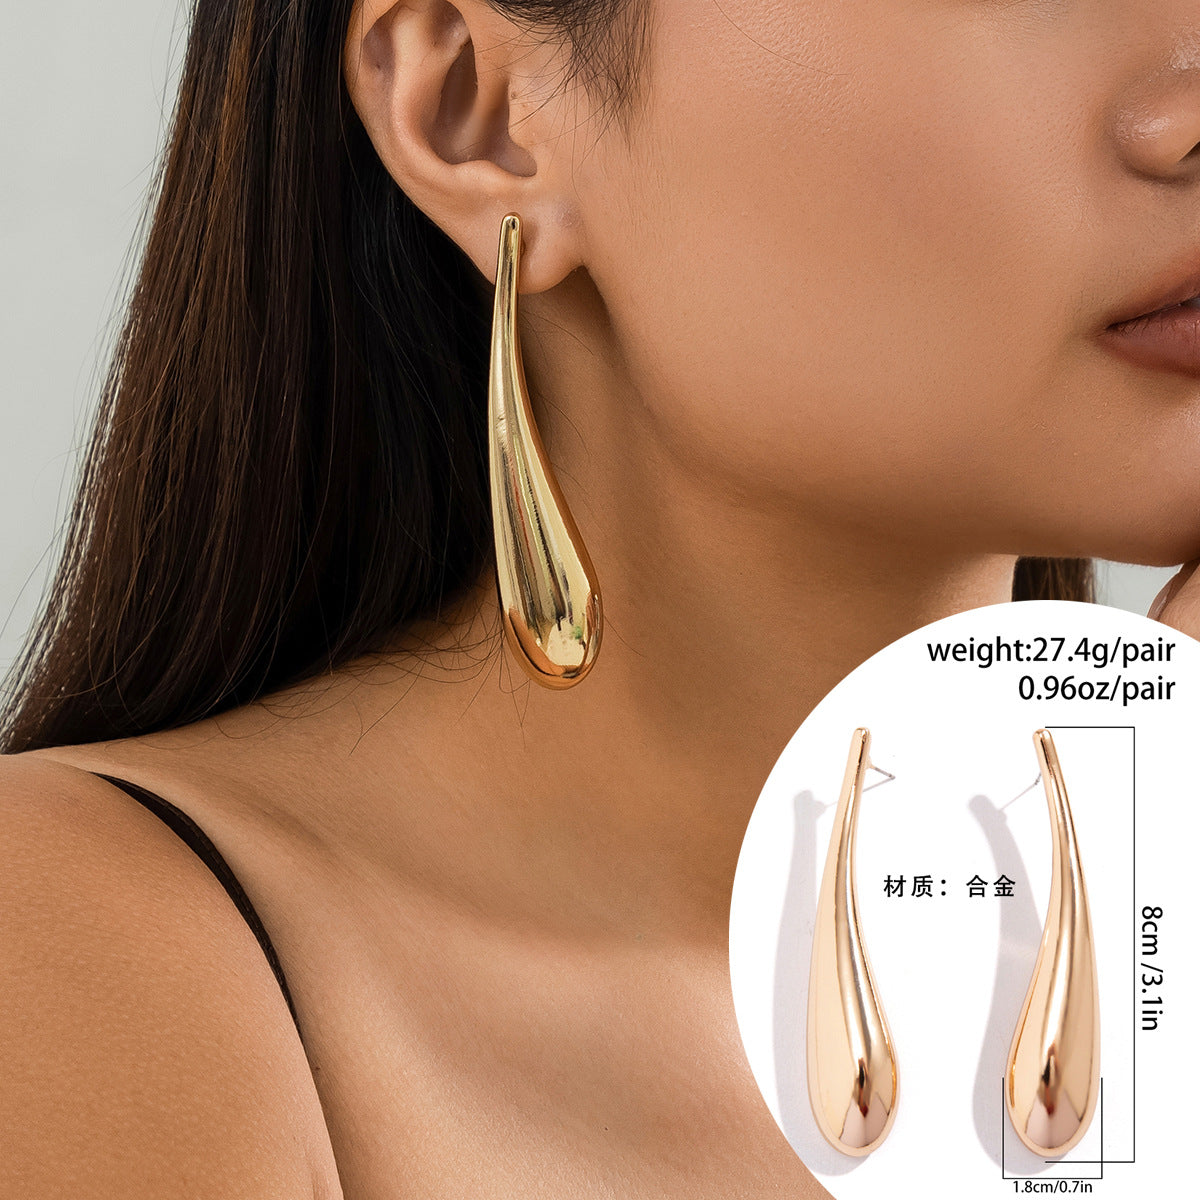 Retro Teardrop Punk Single Earrings with Smooth Hanging Design